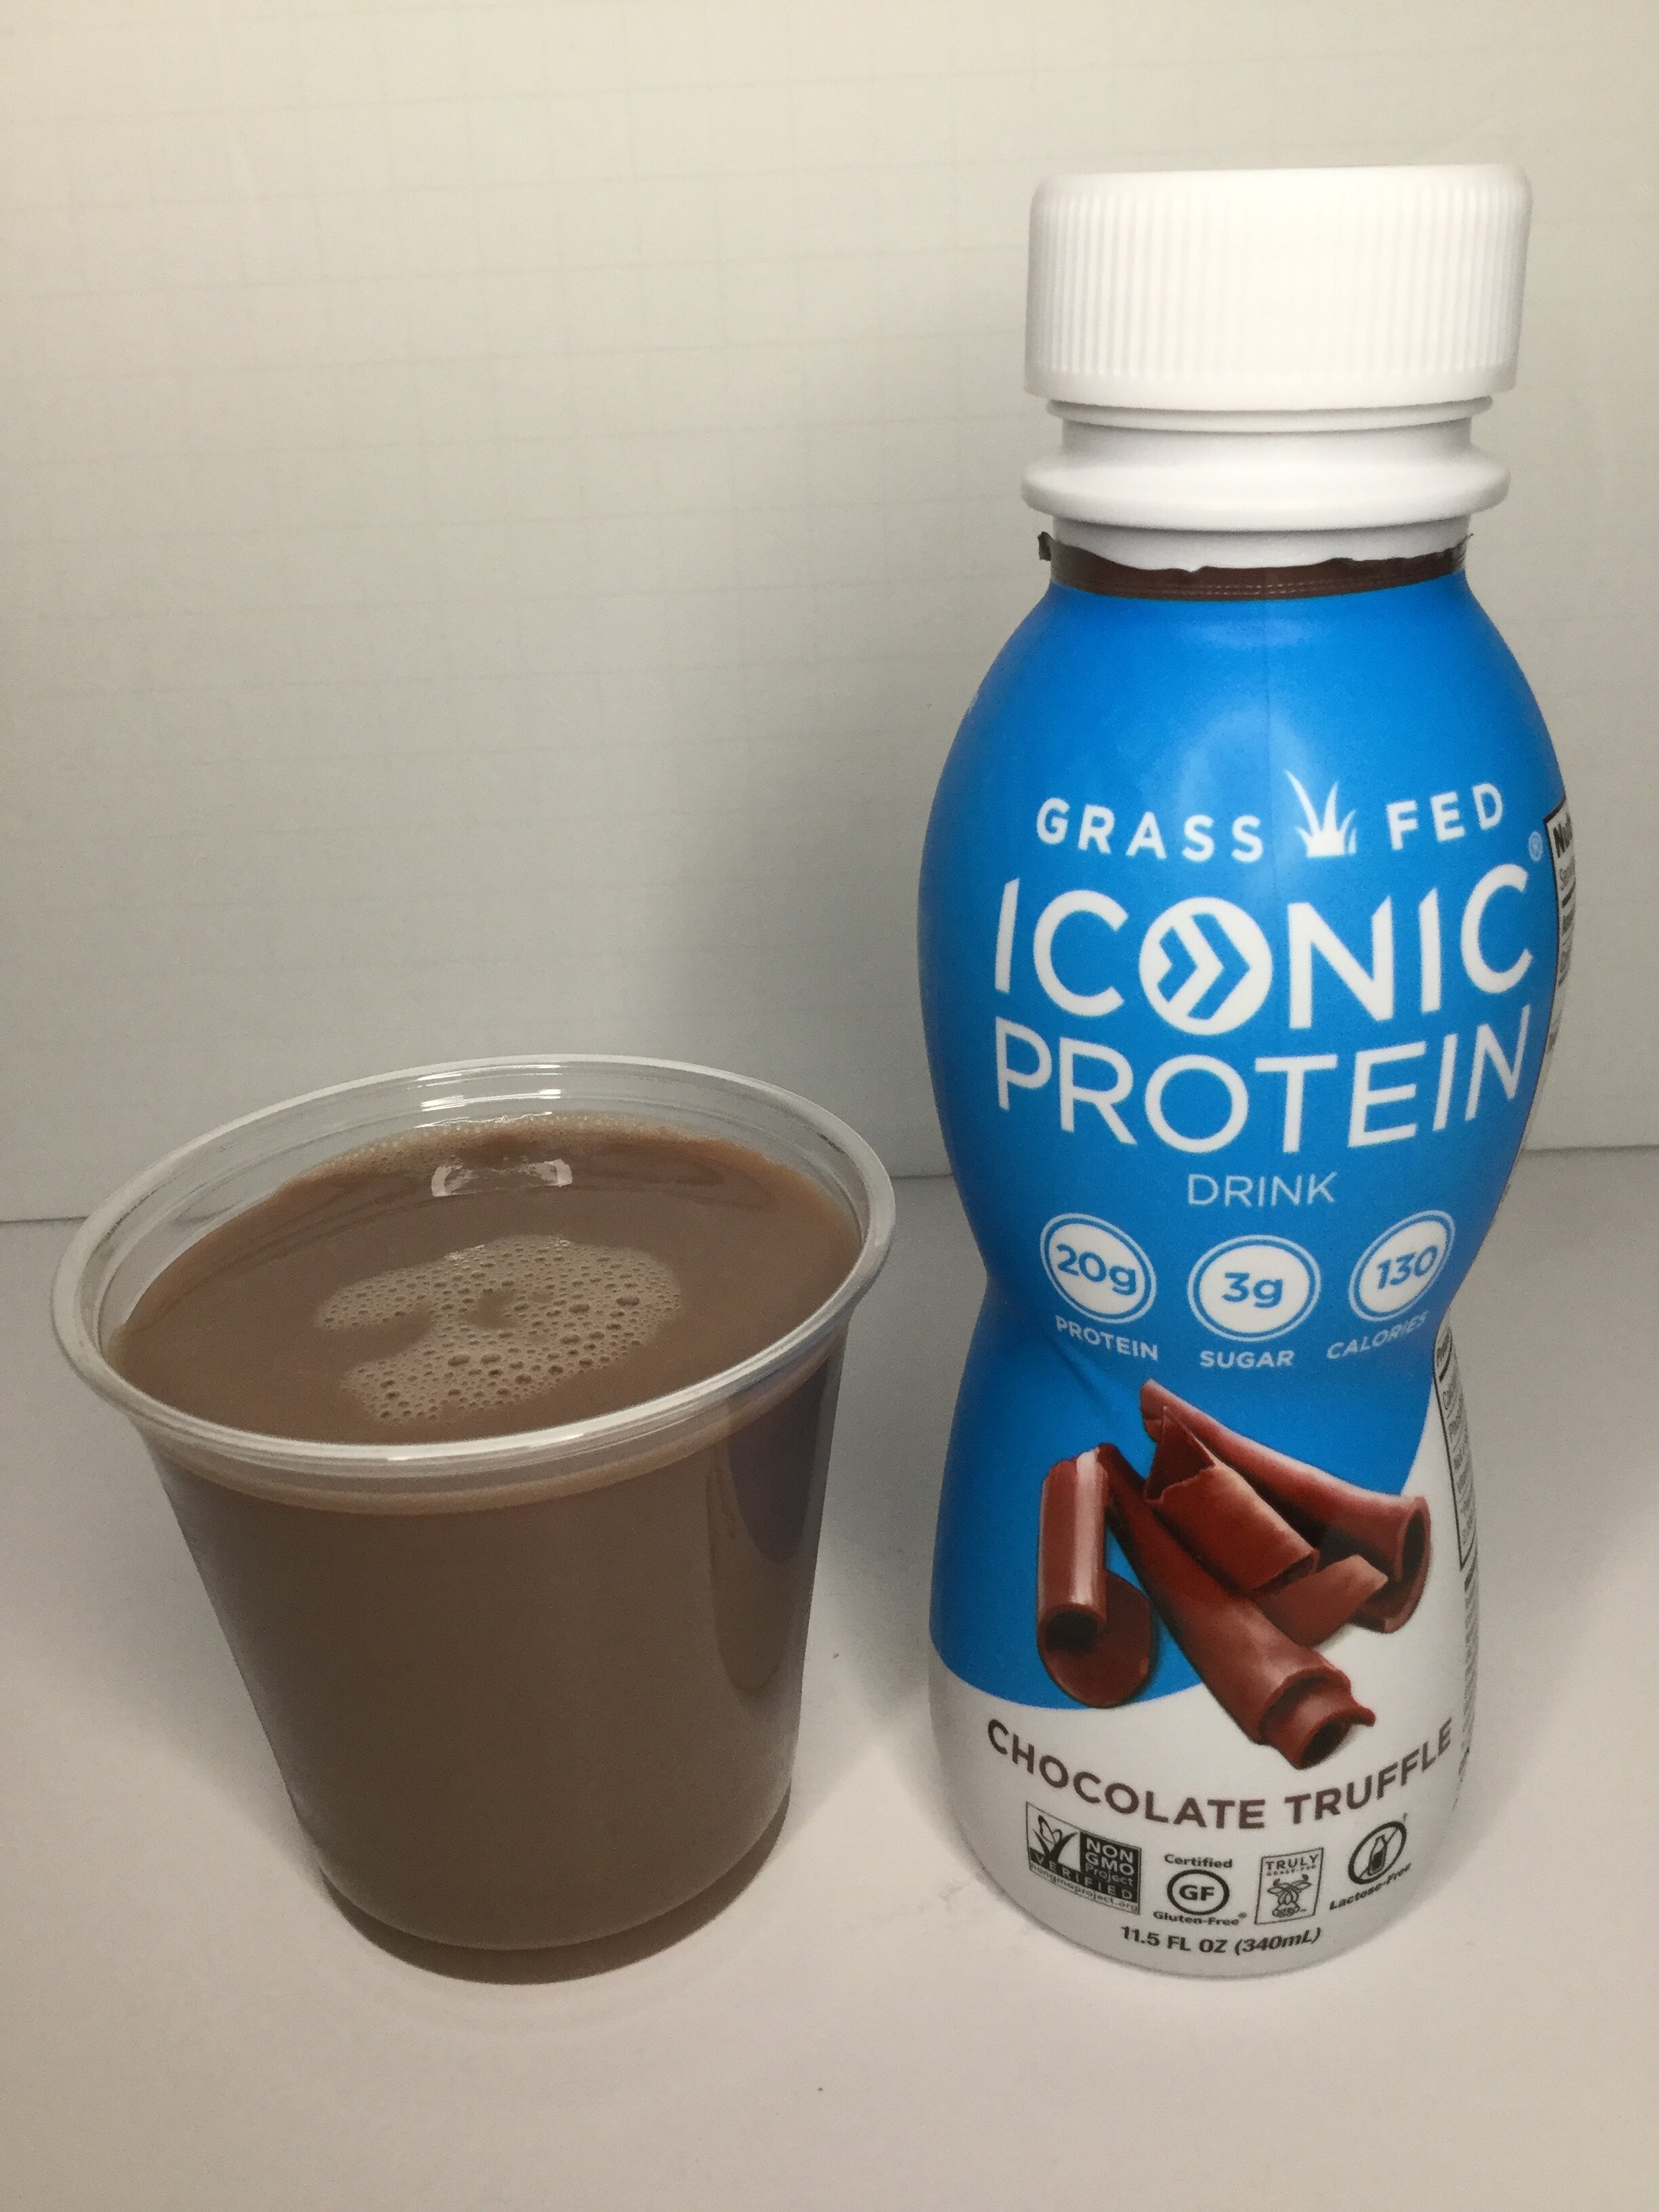 Iconic Protein Review